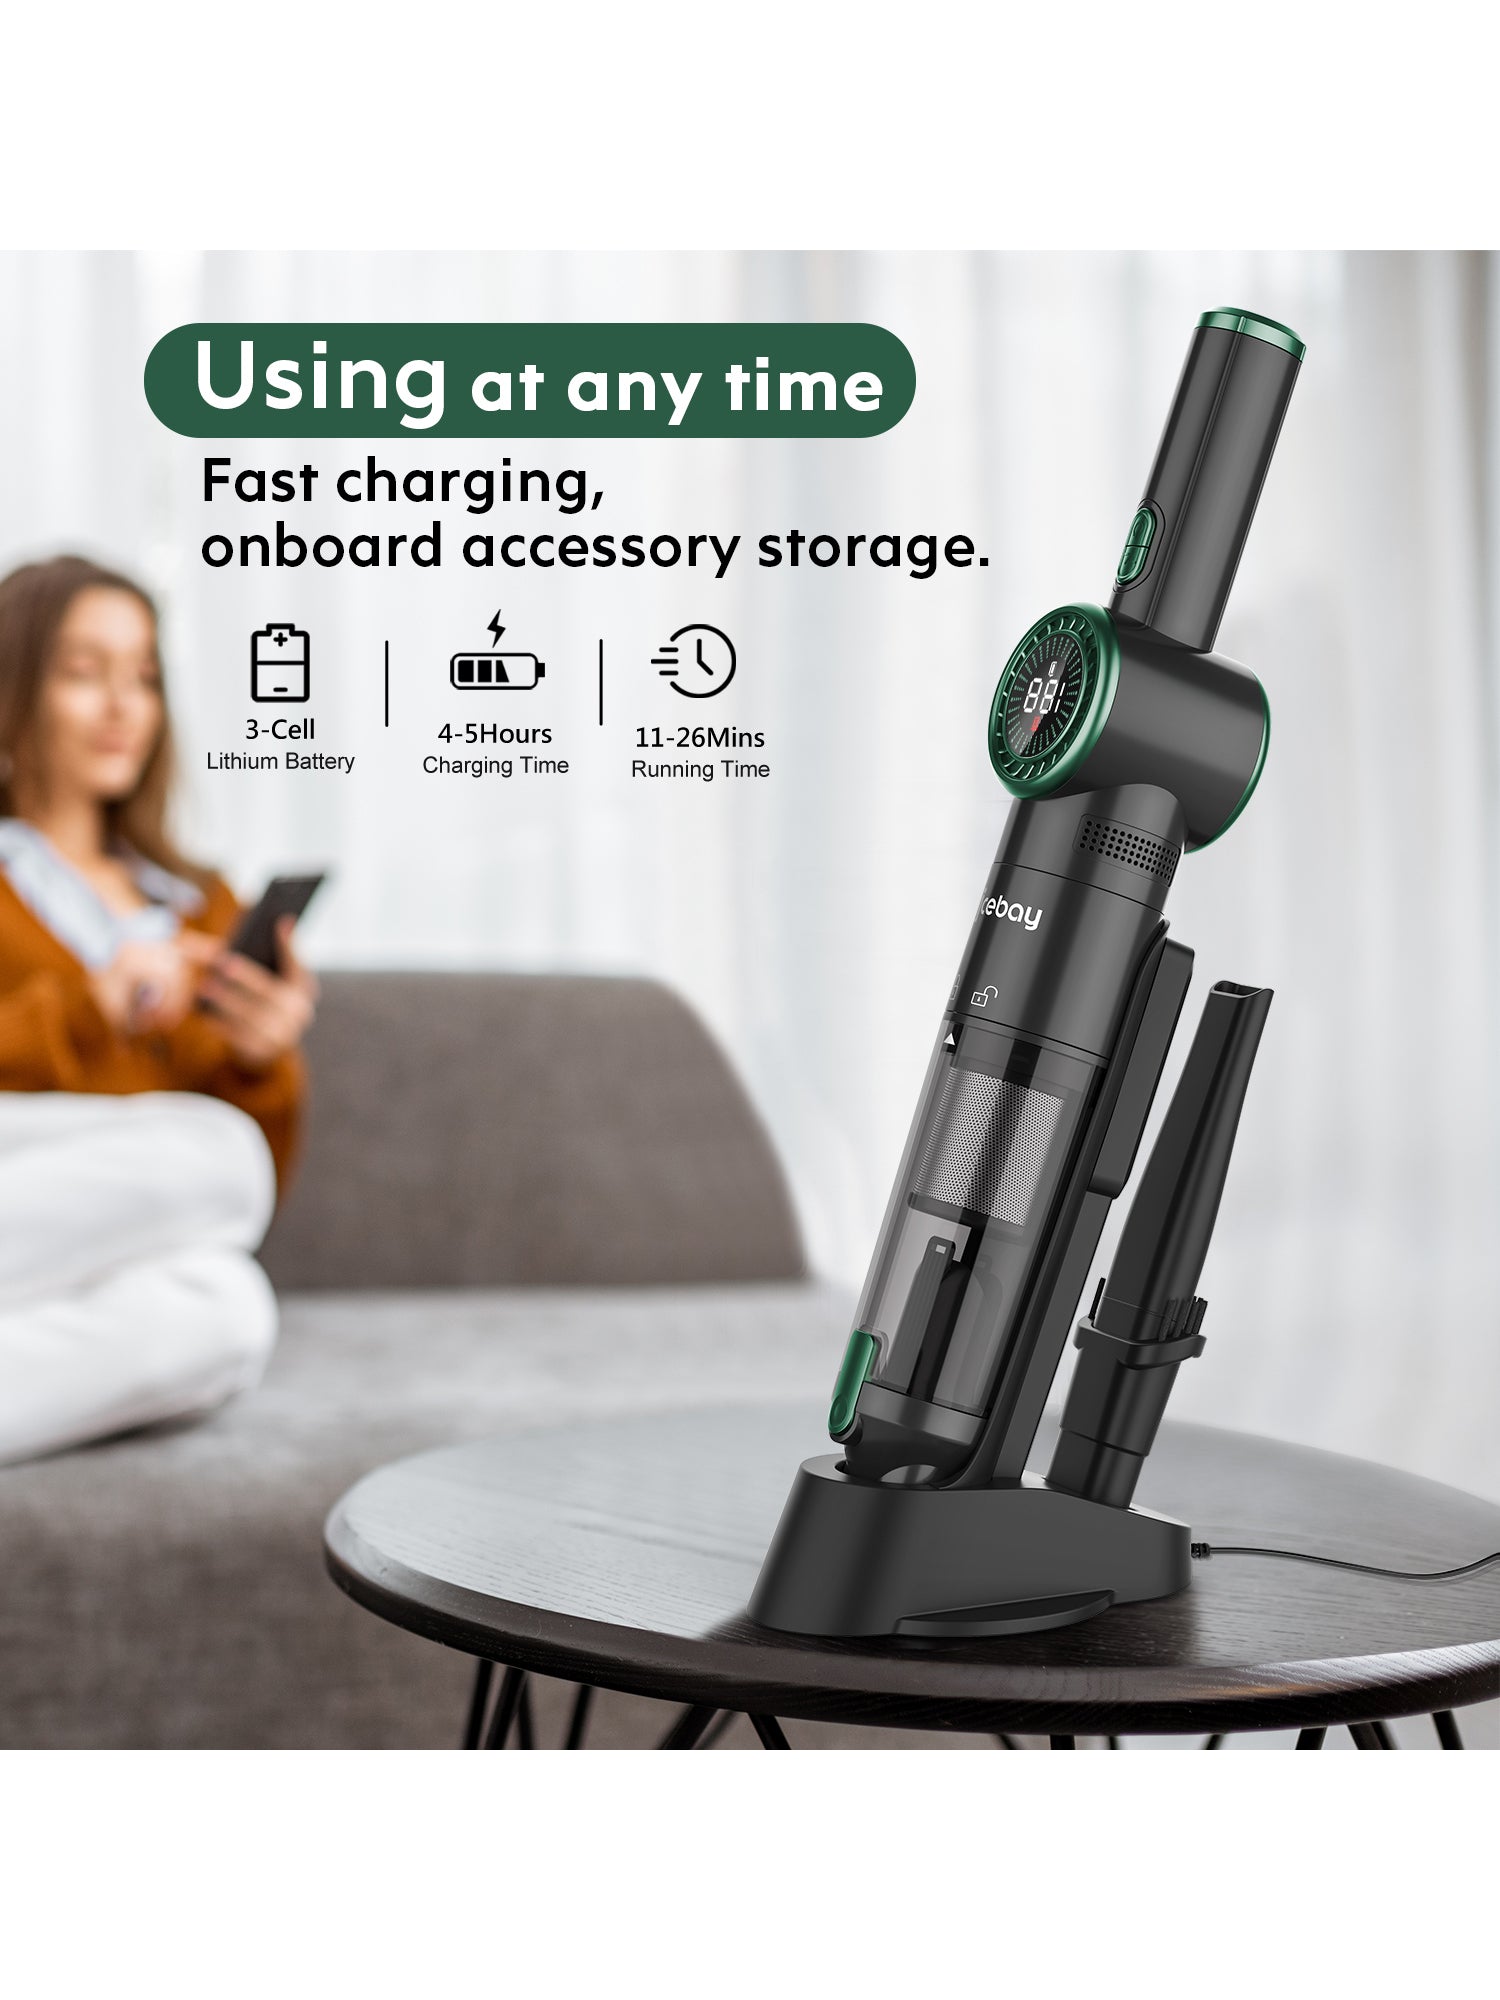 WHALL® Handheld Cordless Vacuum, 15KPA Portable Vacuum, LED Display, Fast Charge, Lightweight (New)